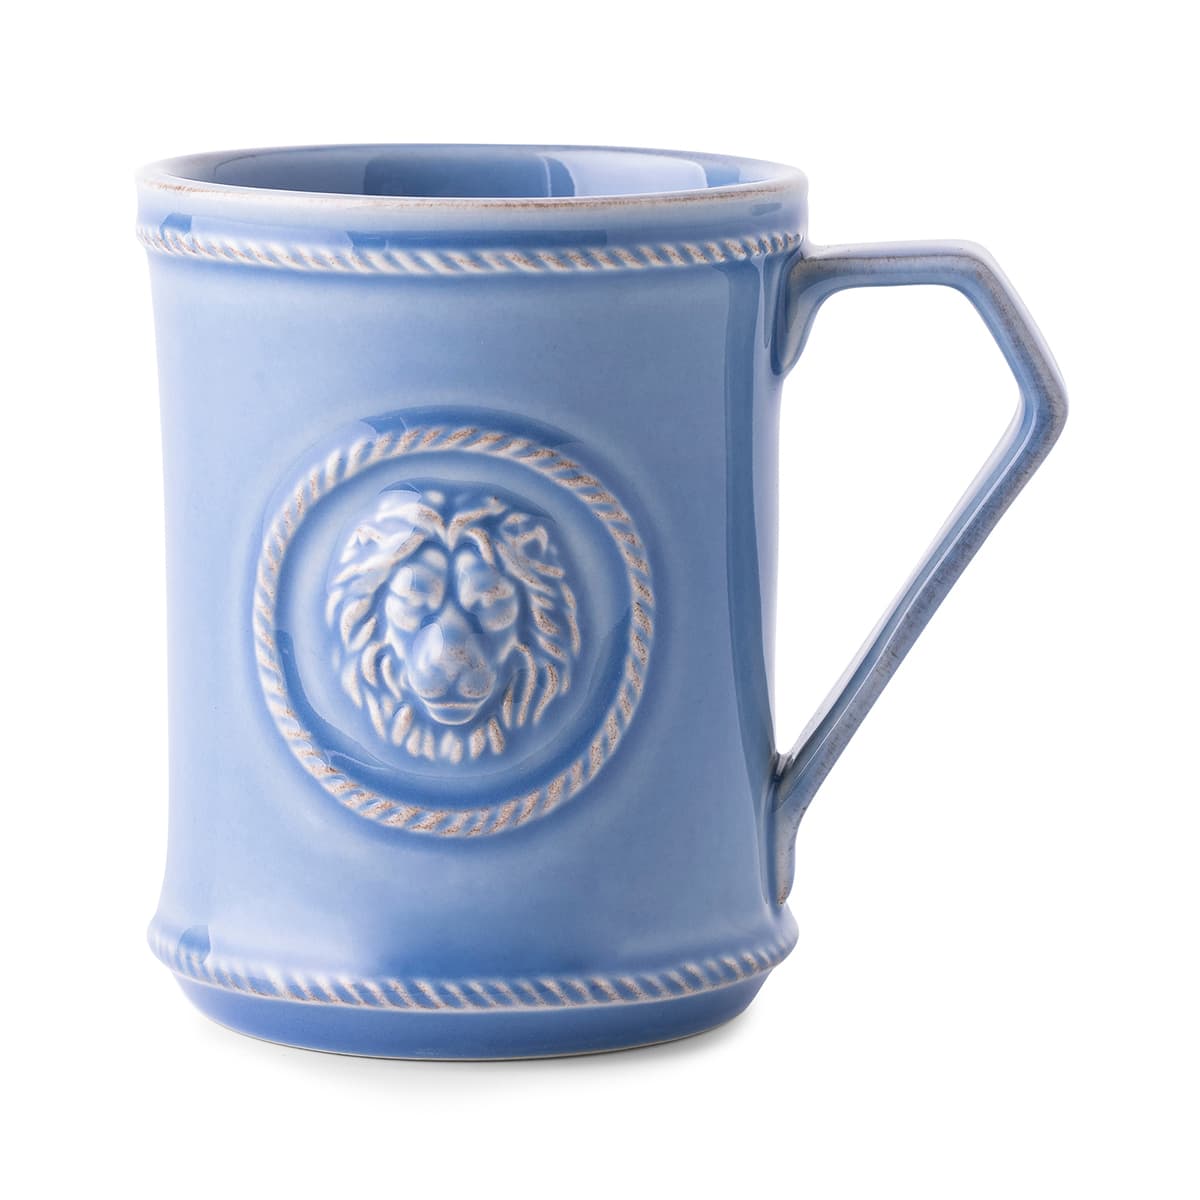 Whether it’s for a gift that speaks for itself or to start your own day, fill it to the brim with liquid courage! Generously proportioned and in our classic Chambray glaze, this mug will bring a well-needed boost every day.